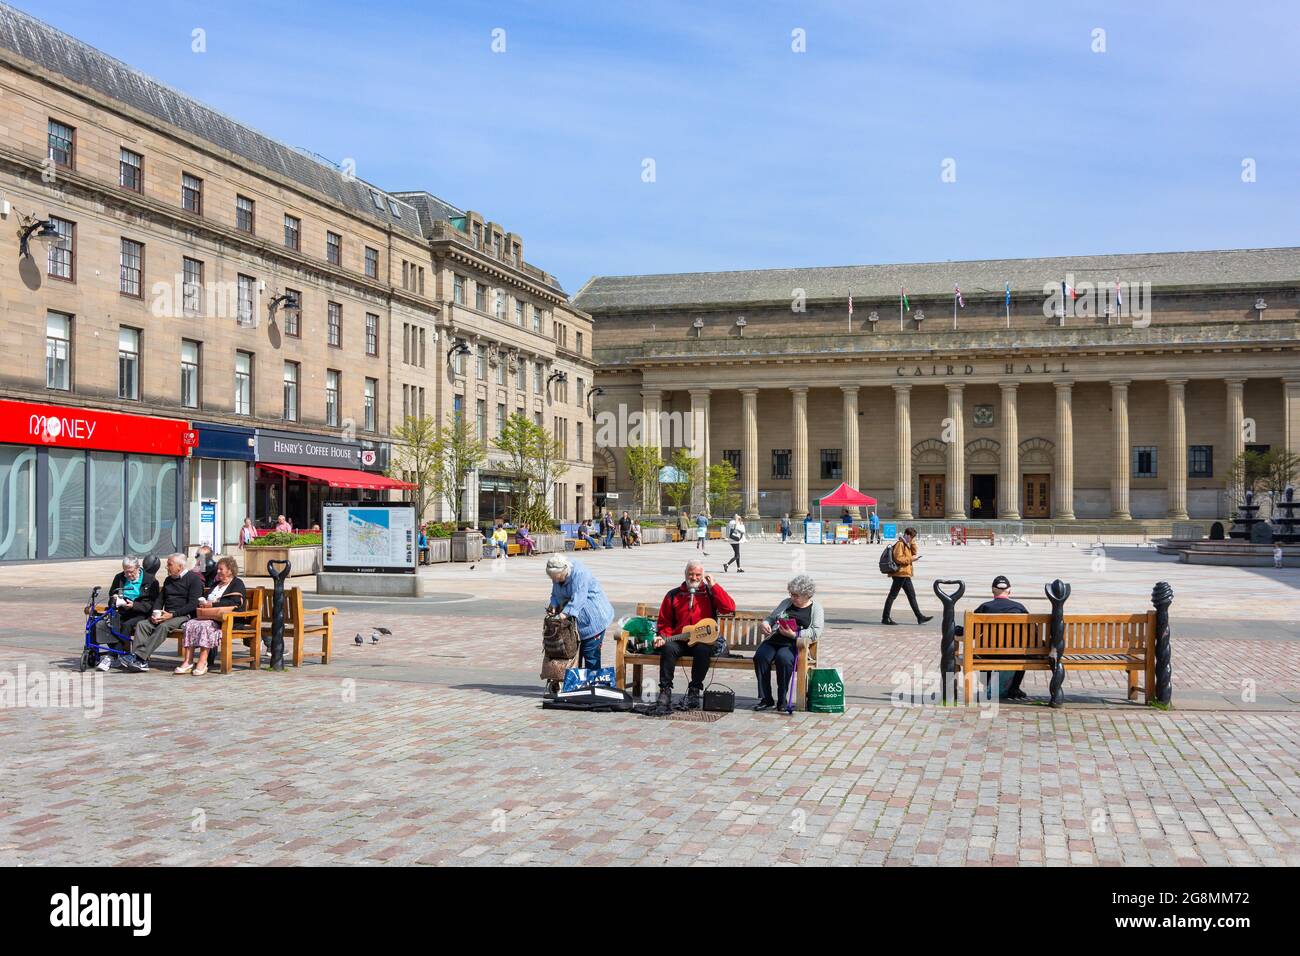 Caird Hall, City Square, Dundee City, Écosse, Royaume-Uni Banque D'Images